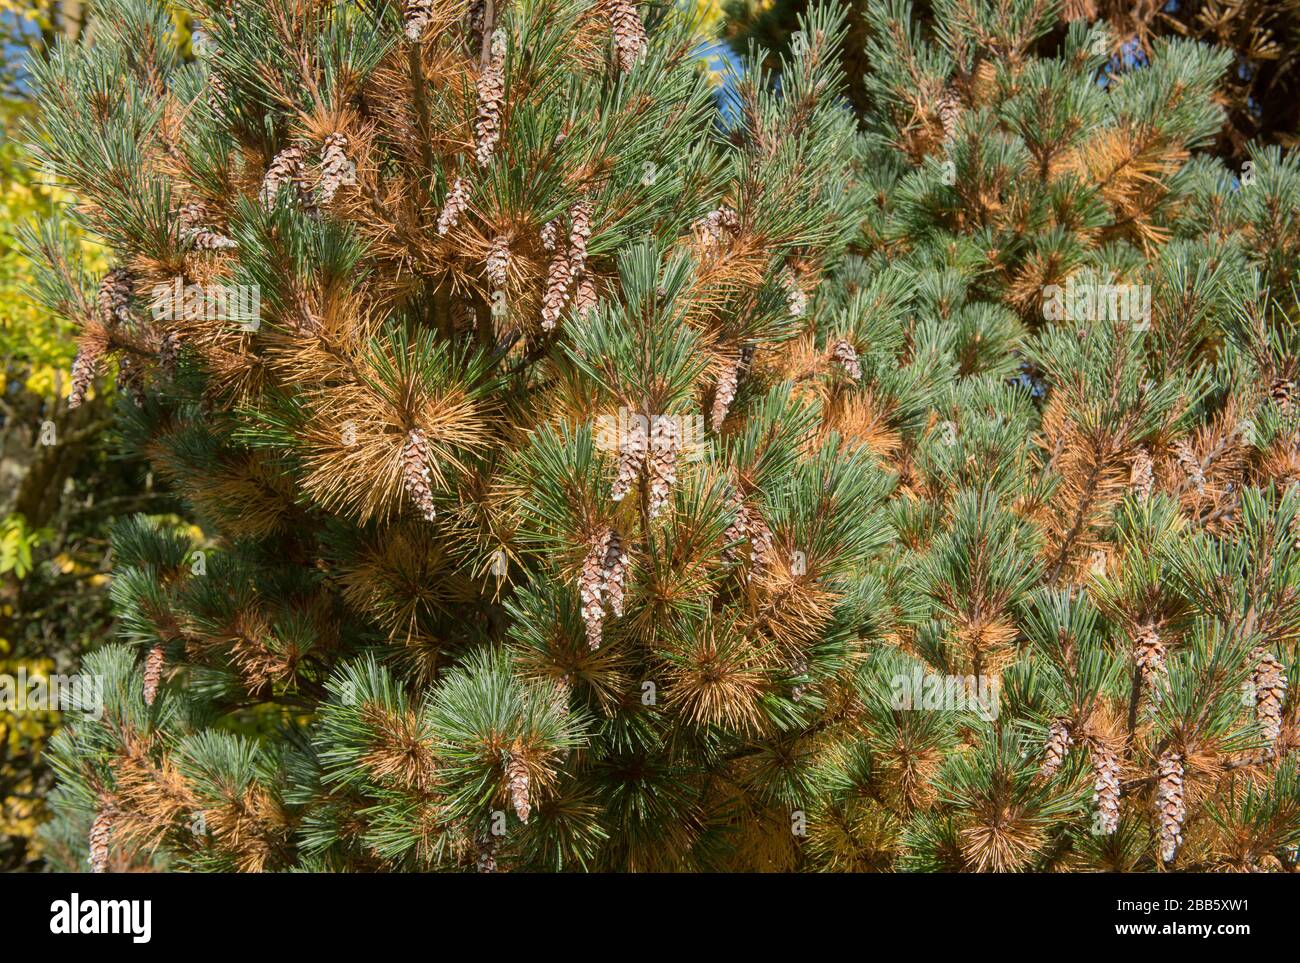 Green Foliage and Cones of a Weymouth or Eastern White Pine Tree (Pinus strobus 'Kruger's Lilliput') in a Garden in Rural Devon, England, UK Stock Photo